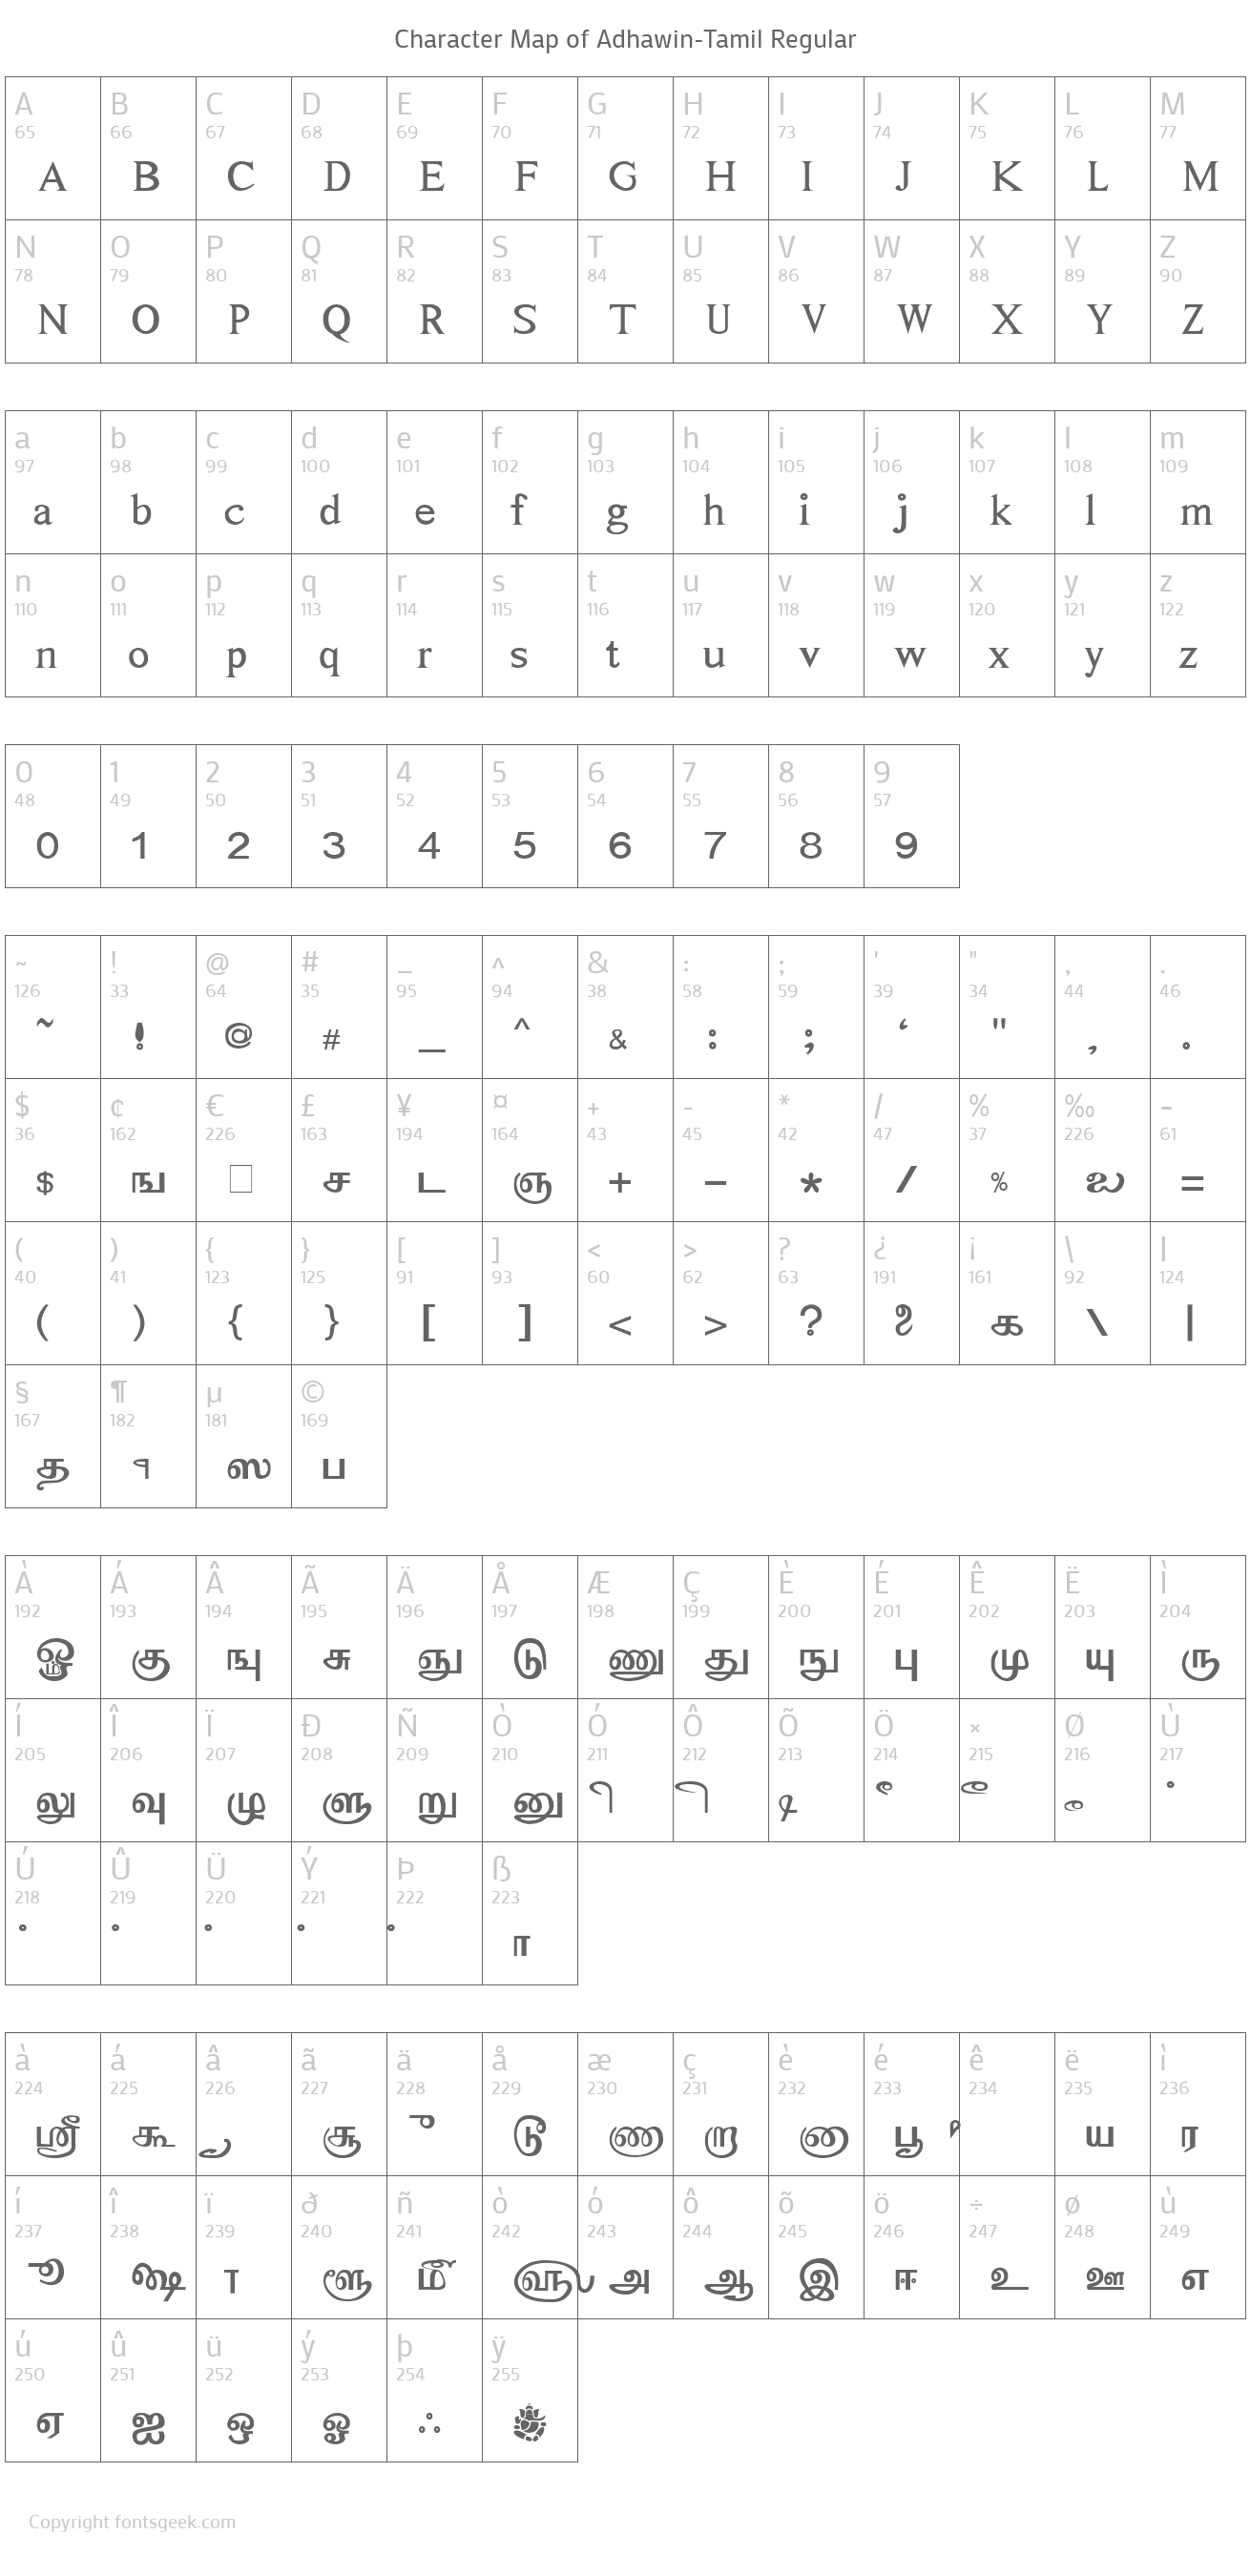 Adhawin-Tamil Font : Download For Free, View Sample Text, Rating And More On Fontsgeek.Com